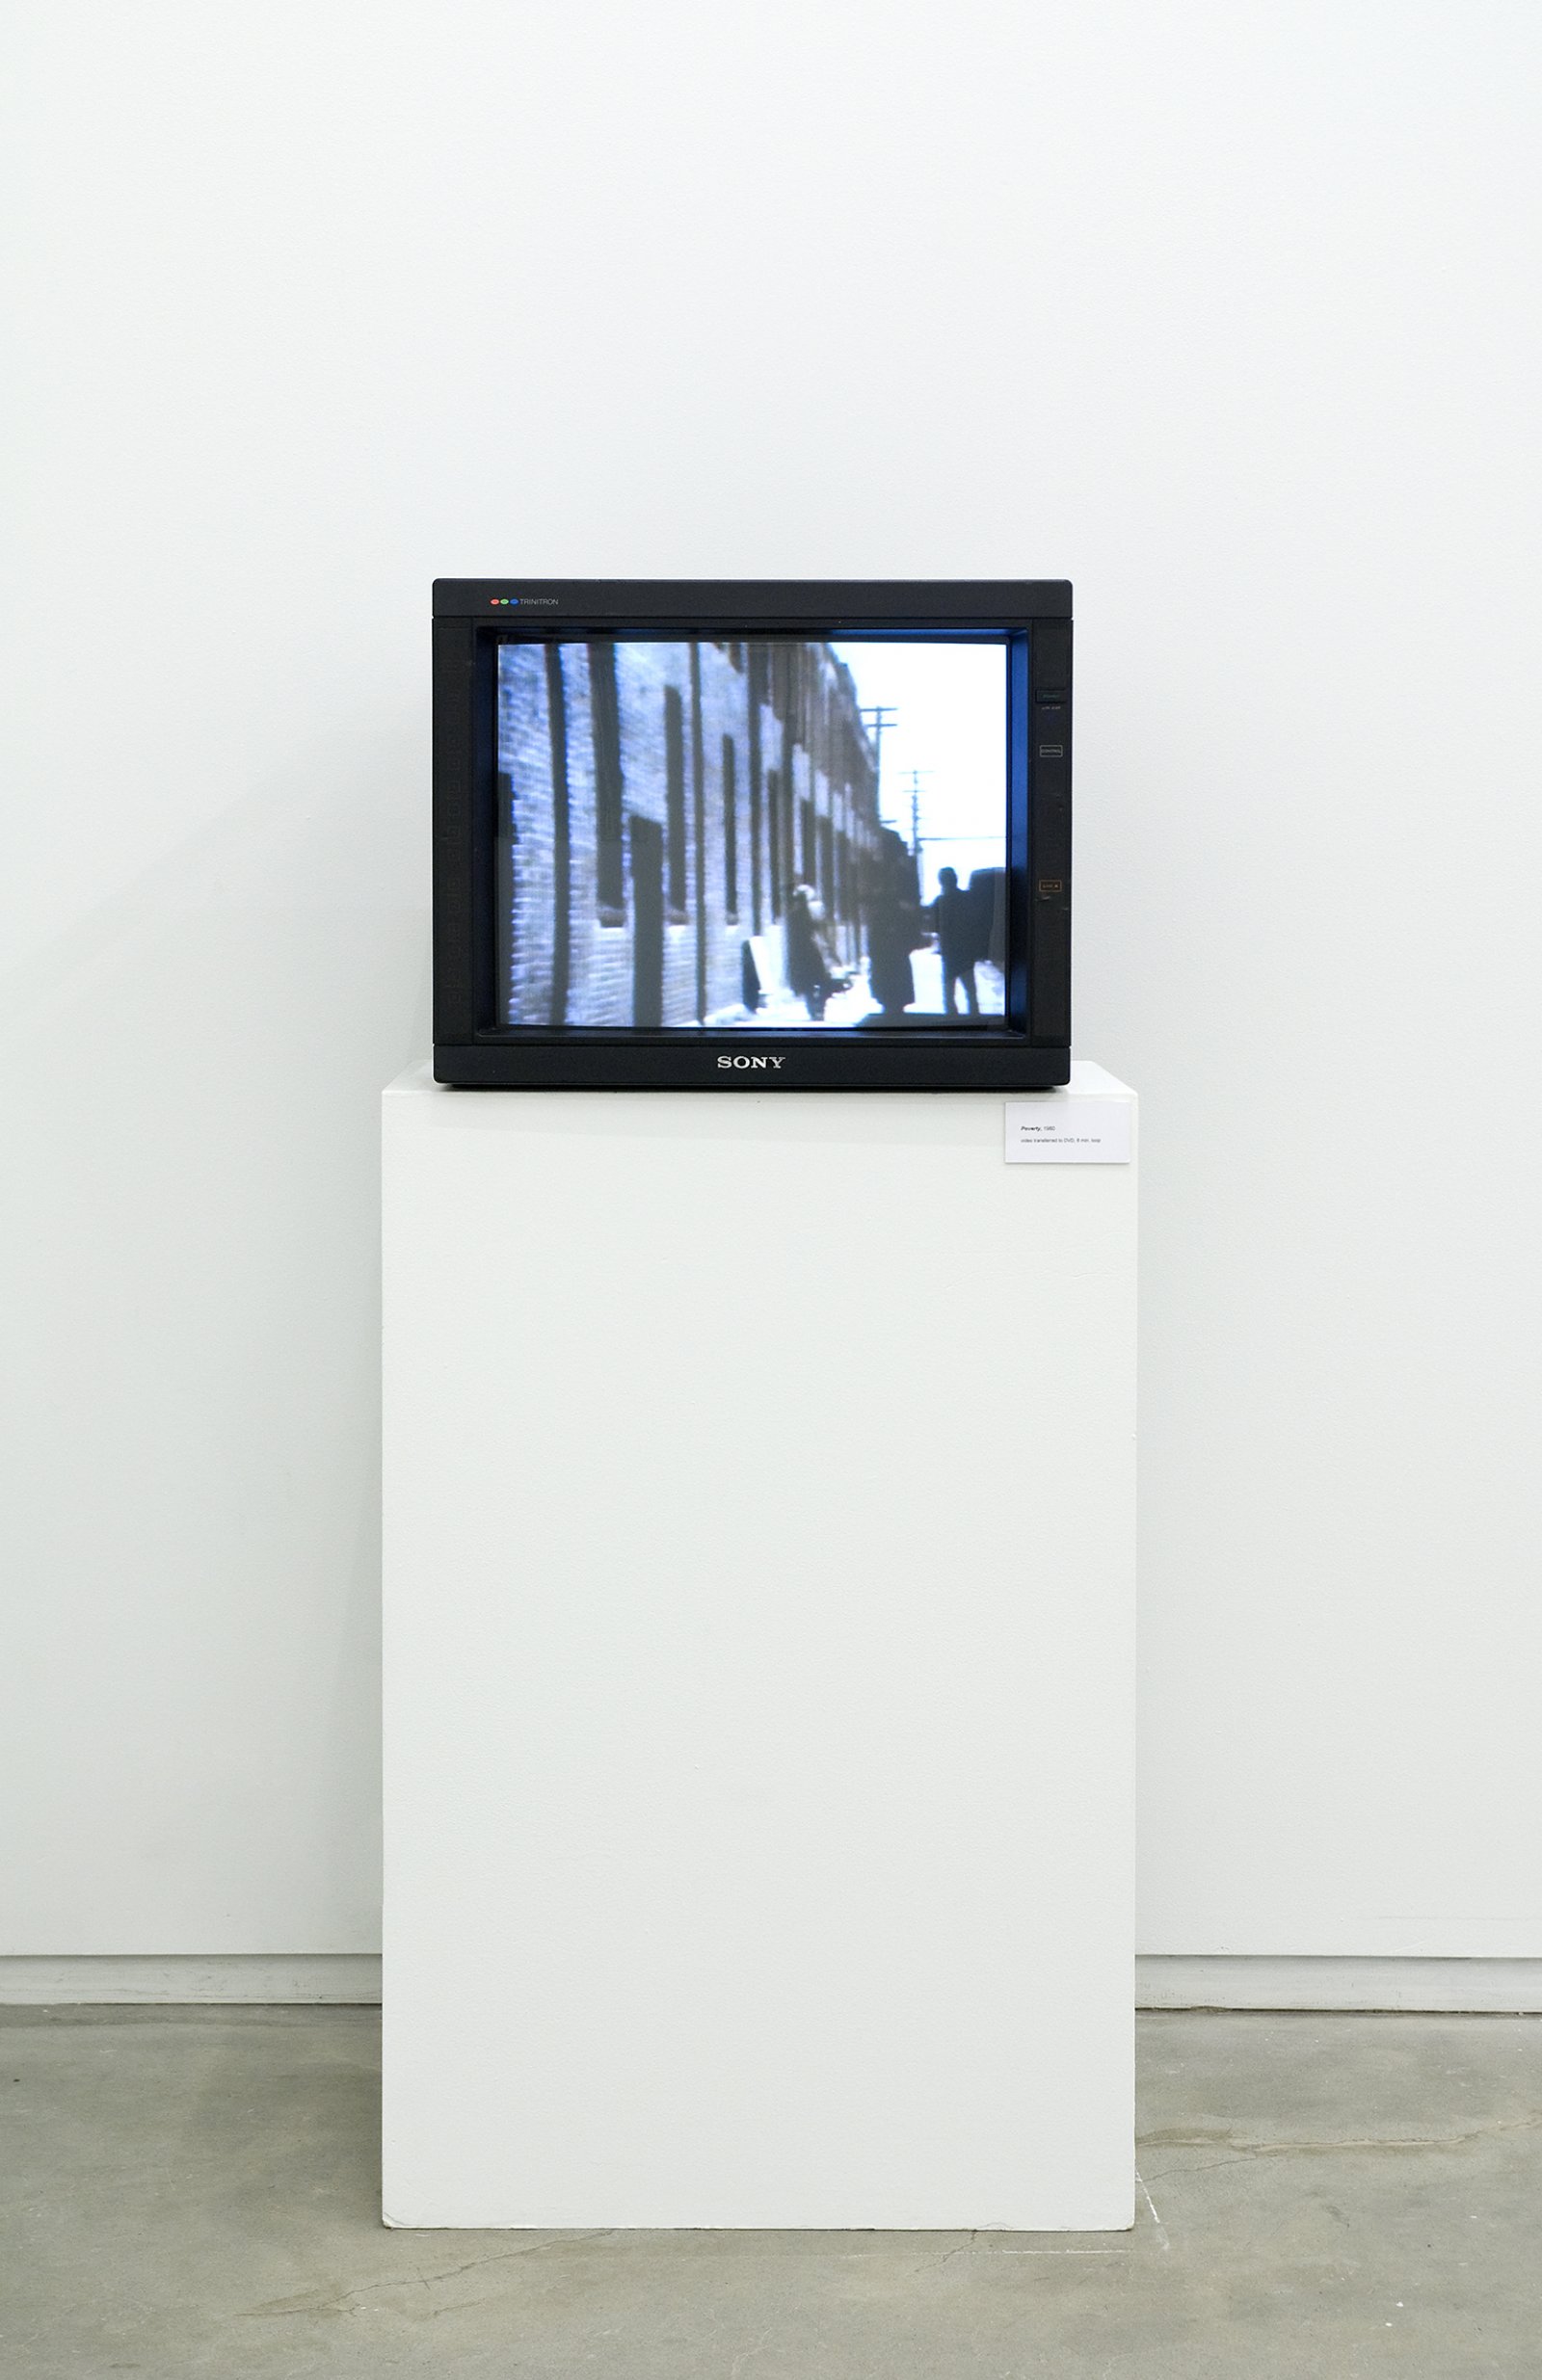 Ian Wallace, Poverty 1980, 1980, 16mm film transferred to digital, dimensions variable